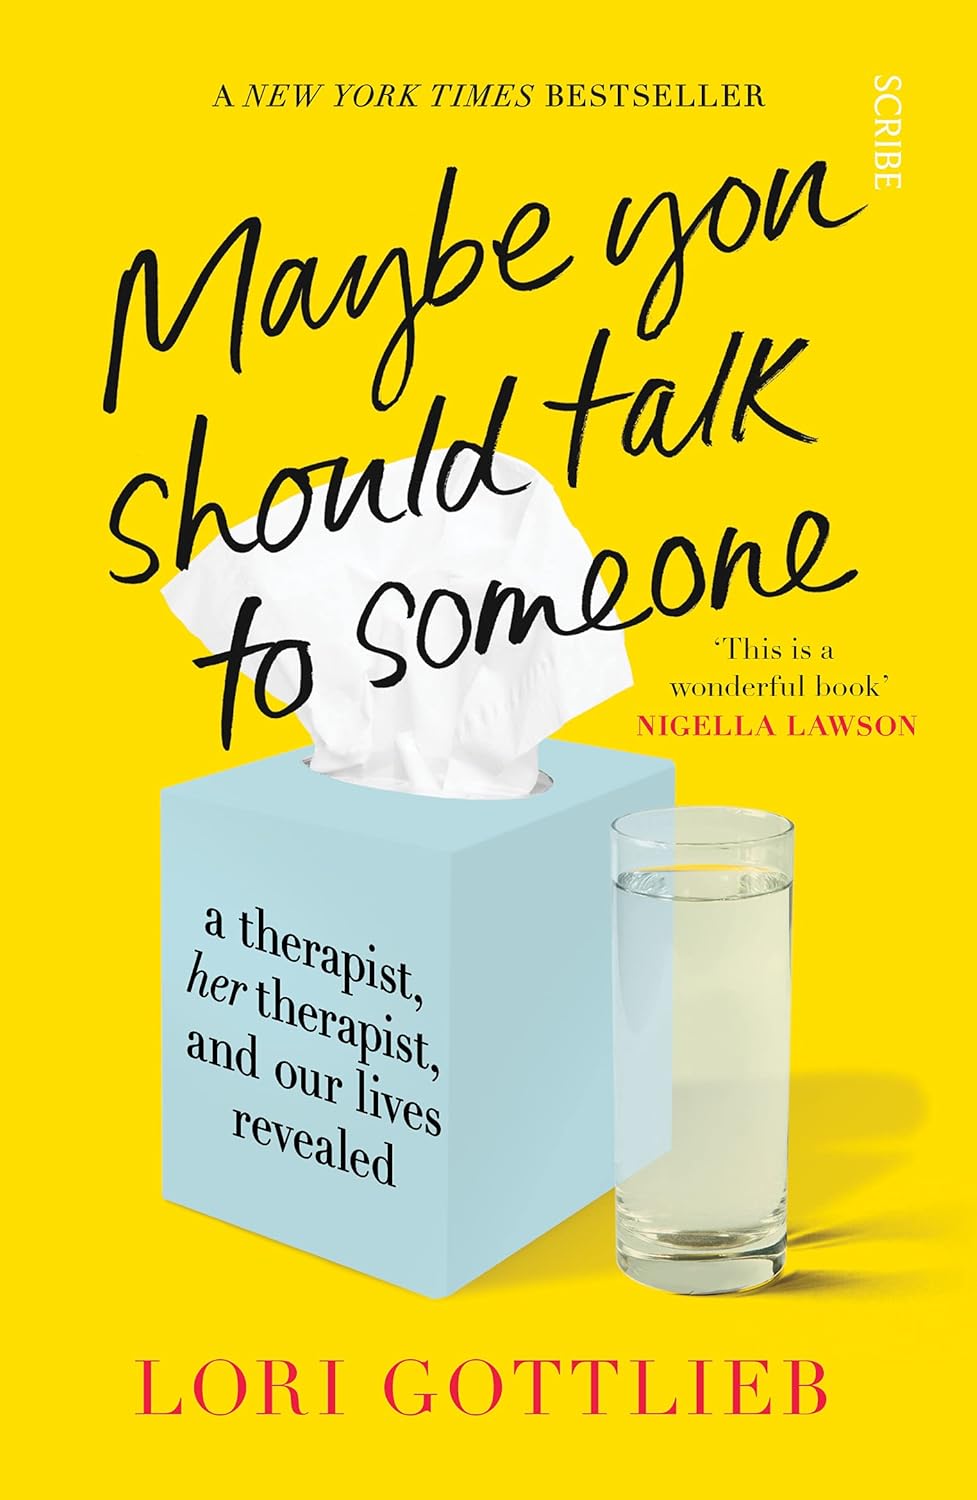 Cover of "Maybe You Should Talk to Someone" by Lori Gottlieb